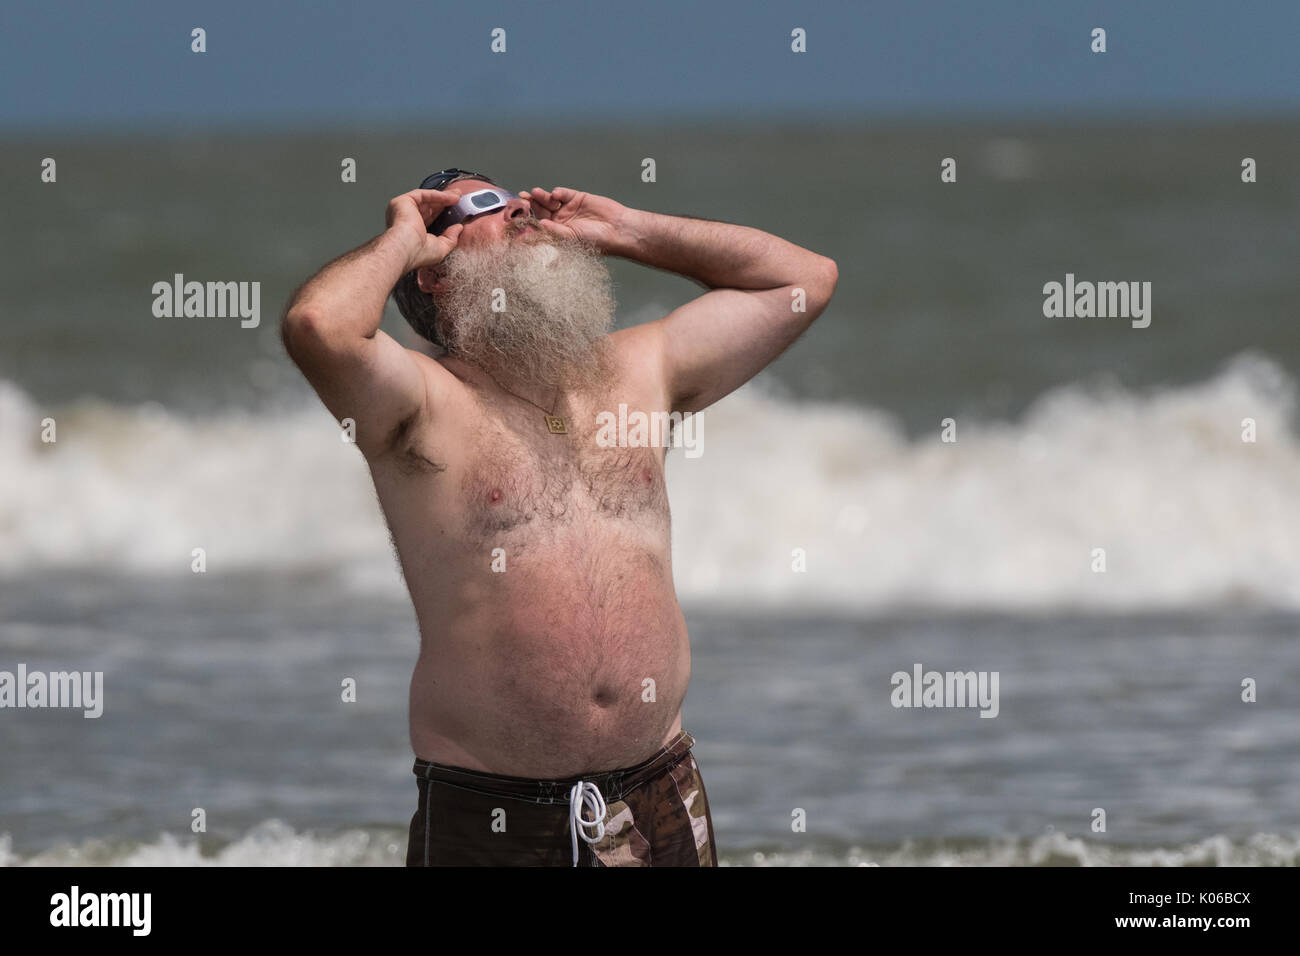 Charleston, Isle of Palms, USA. 21st Aug, 2017. A man watches the total solar eclipse standing in the water as it passes over the beach outside Charleston August 21, 2017 in Isle of Palms, South Carolina. The solar eclipse after sweeping across the nation crosses the Charleston area before heading over the Atlantic Ocean. Credit: Planetpix/Alamy Live News Stock Photo